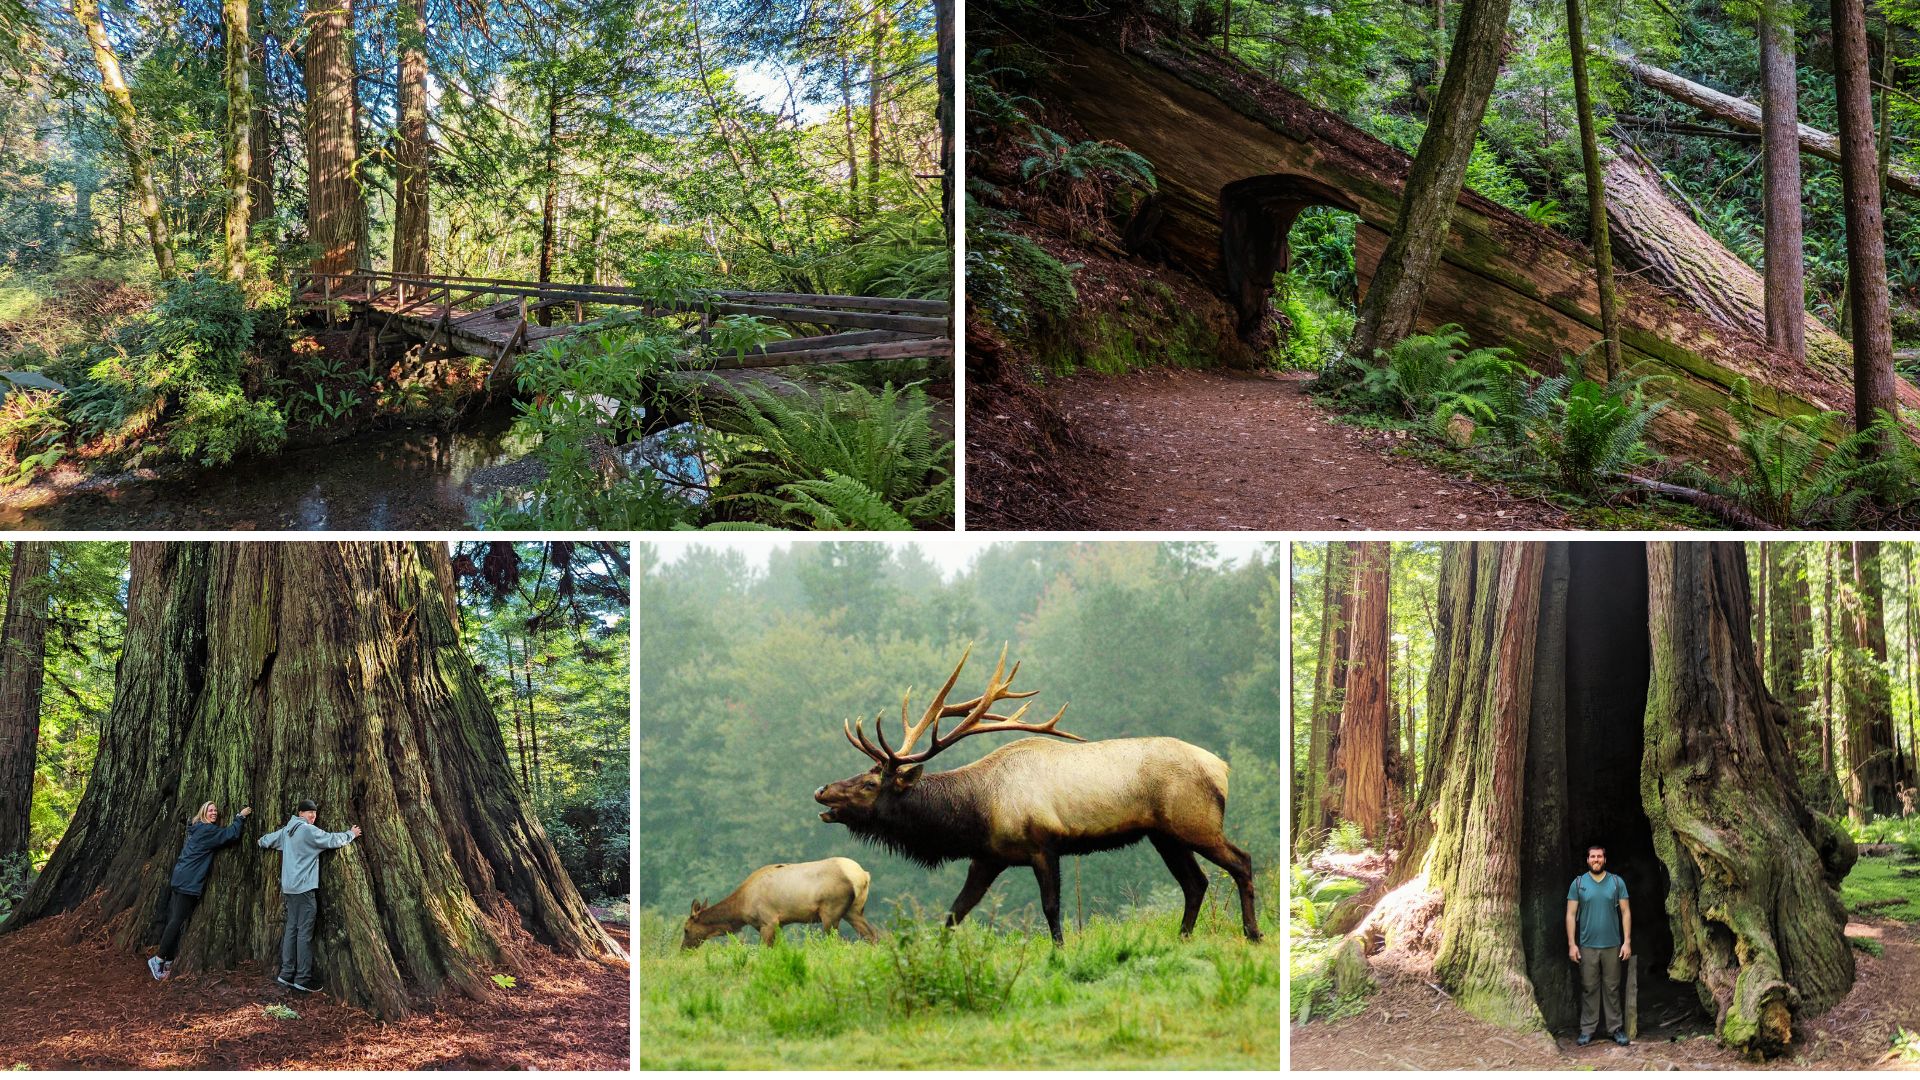 Discover the Wonder of the Redwoods!